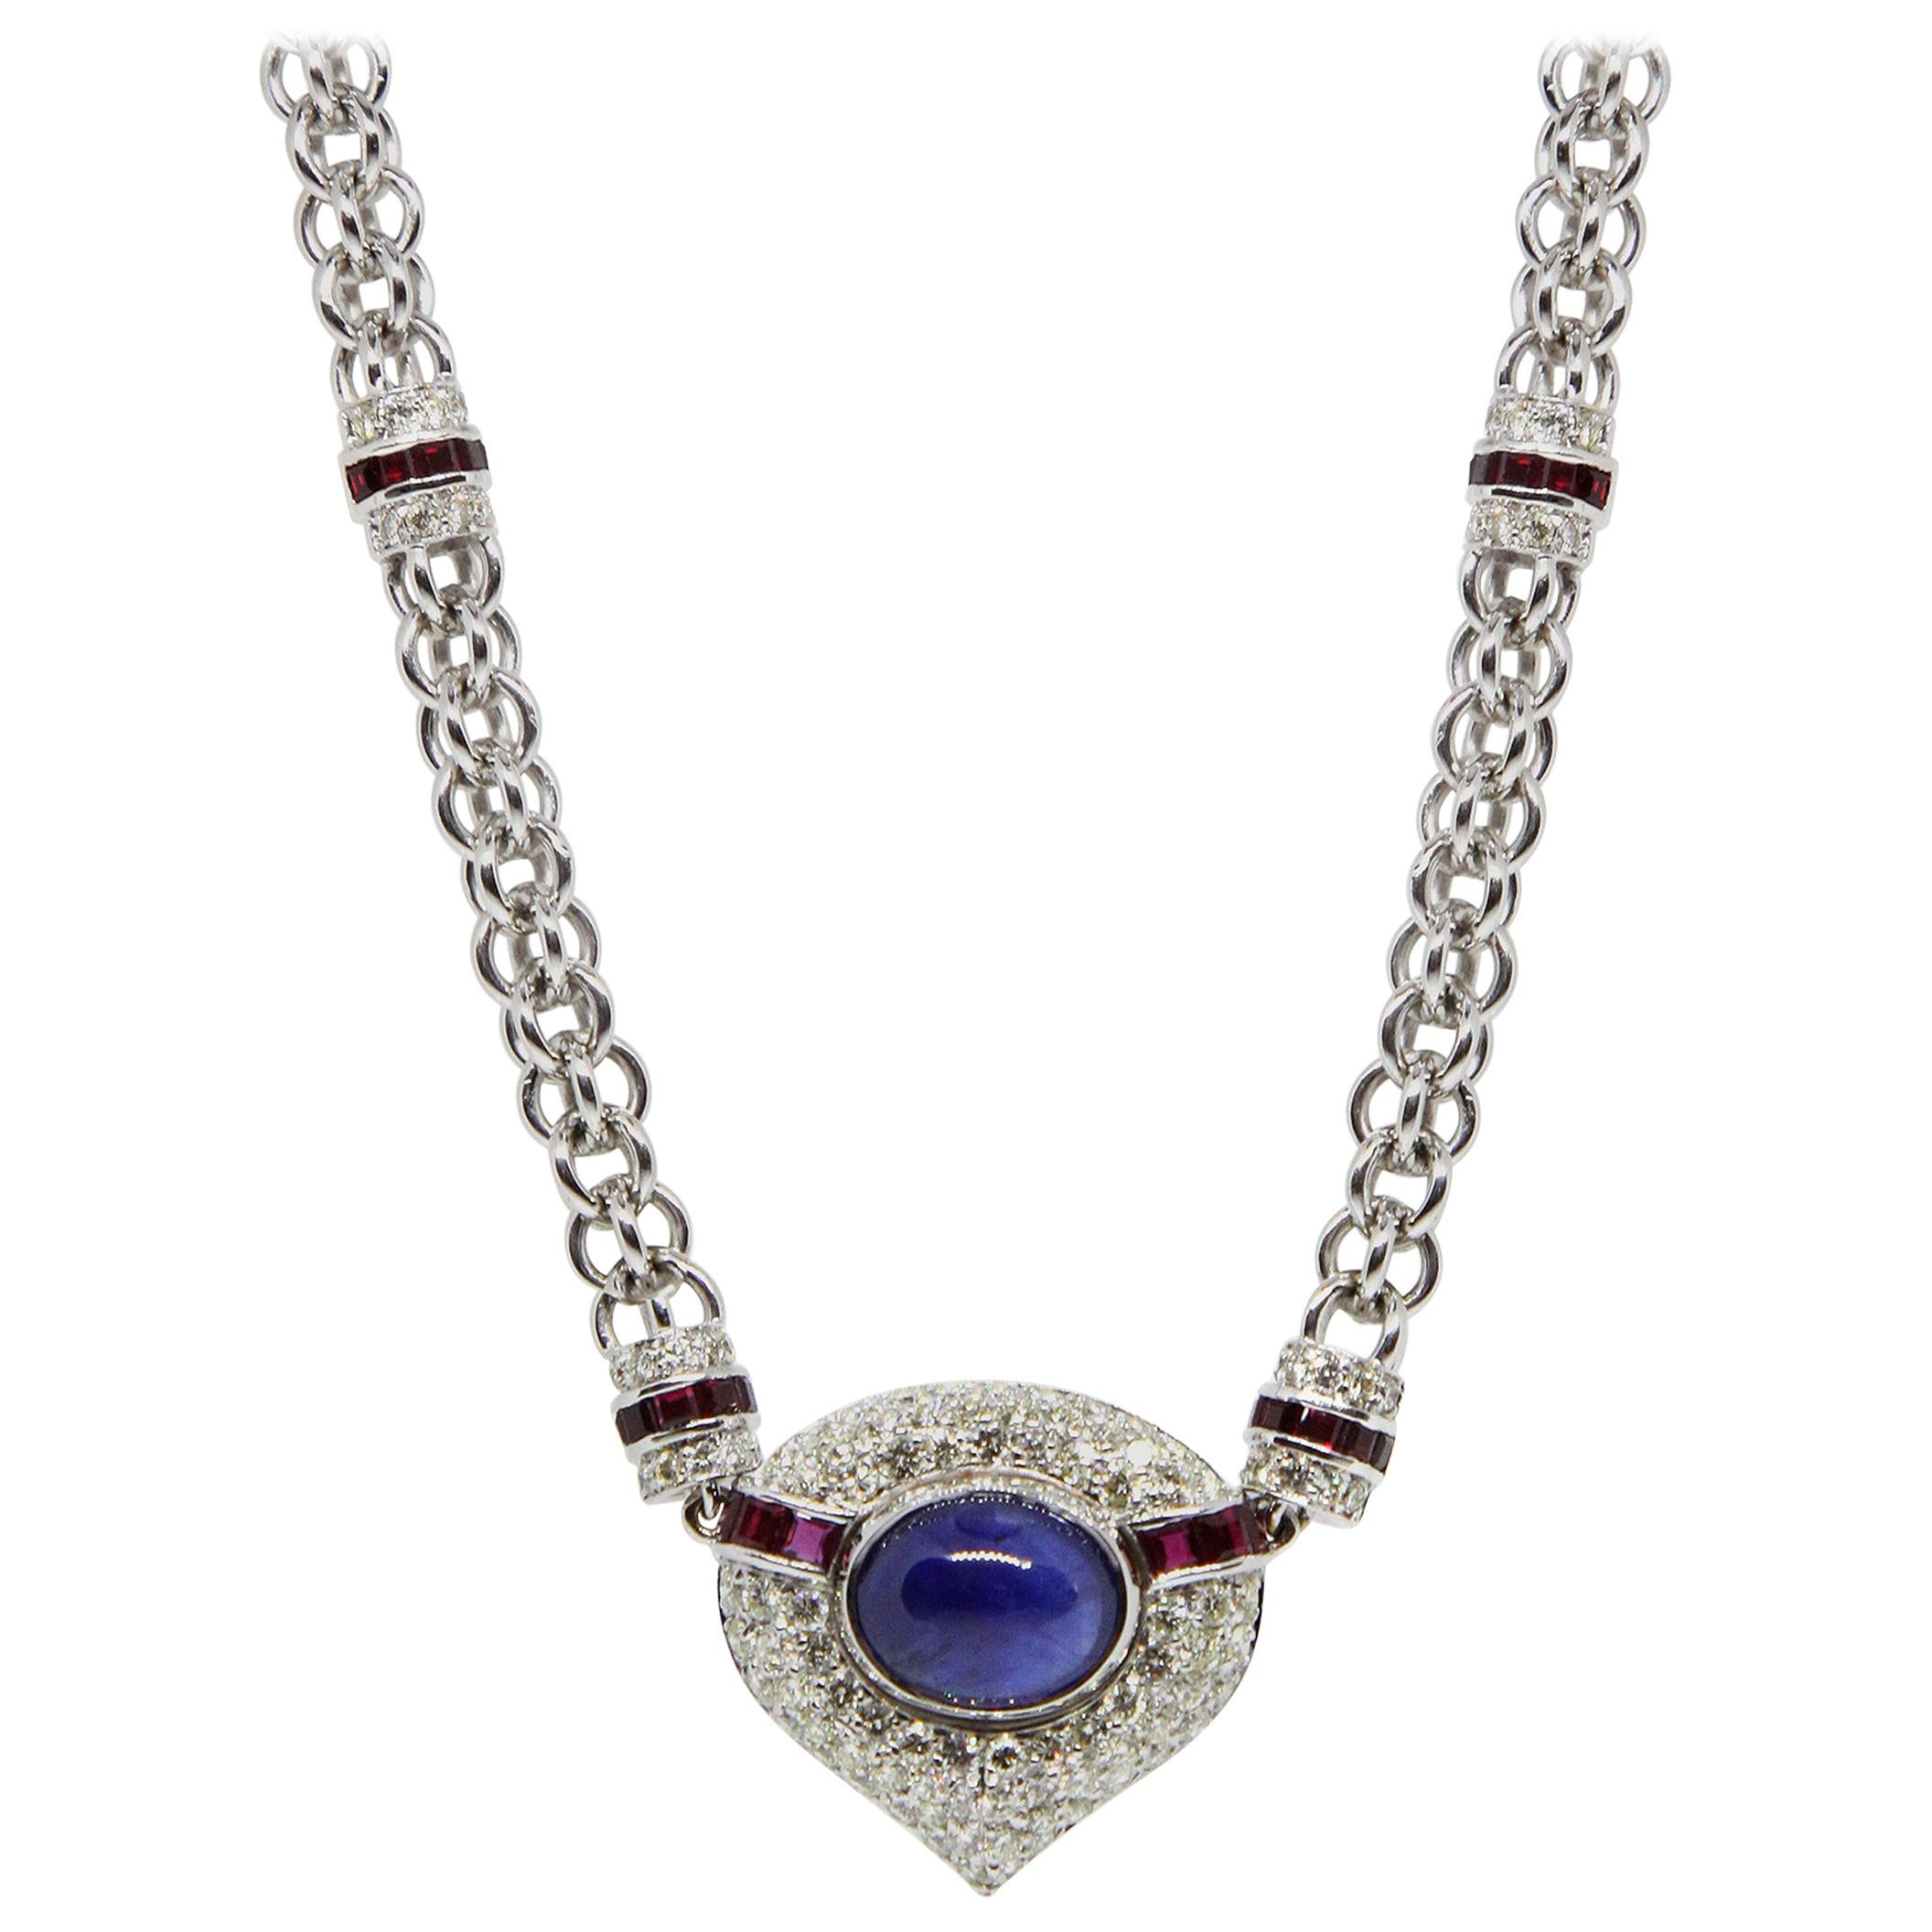 Vacheron Constantin Rare Diamond Ruby and Sapphire Necklace and Earrings Set